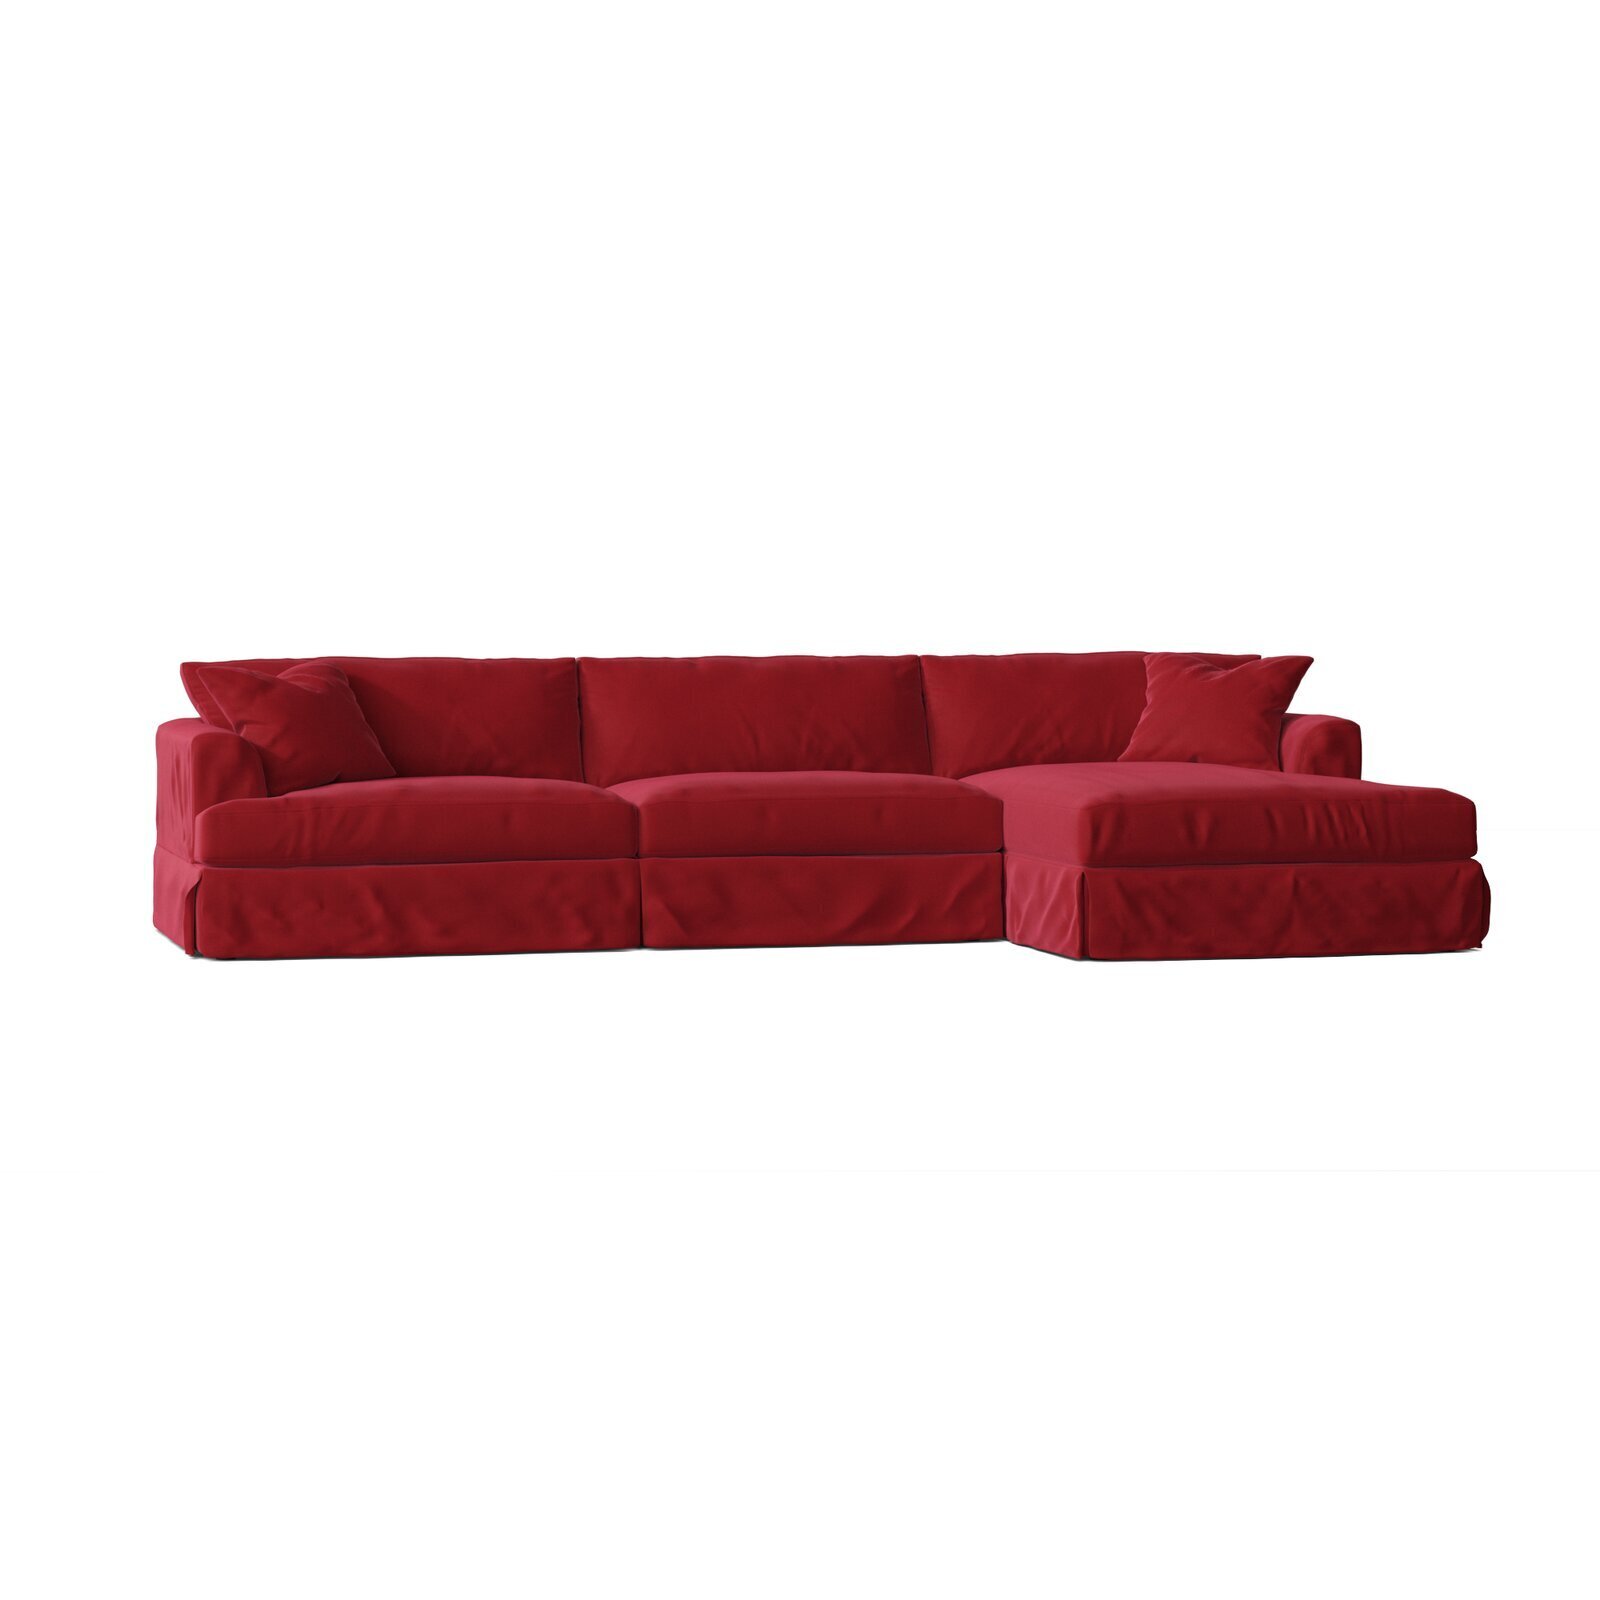 Deep Seated Home Theater Sectional Sofa